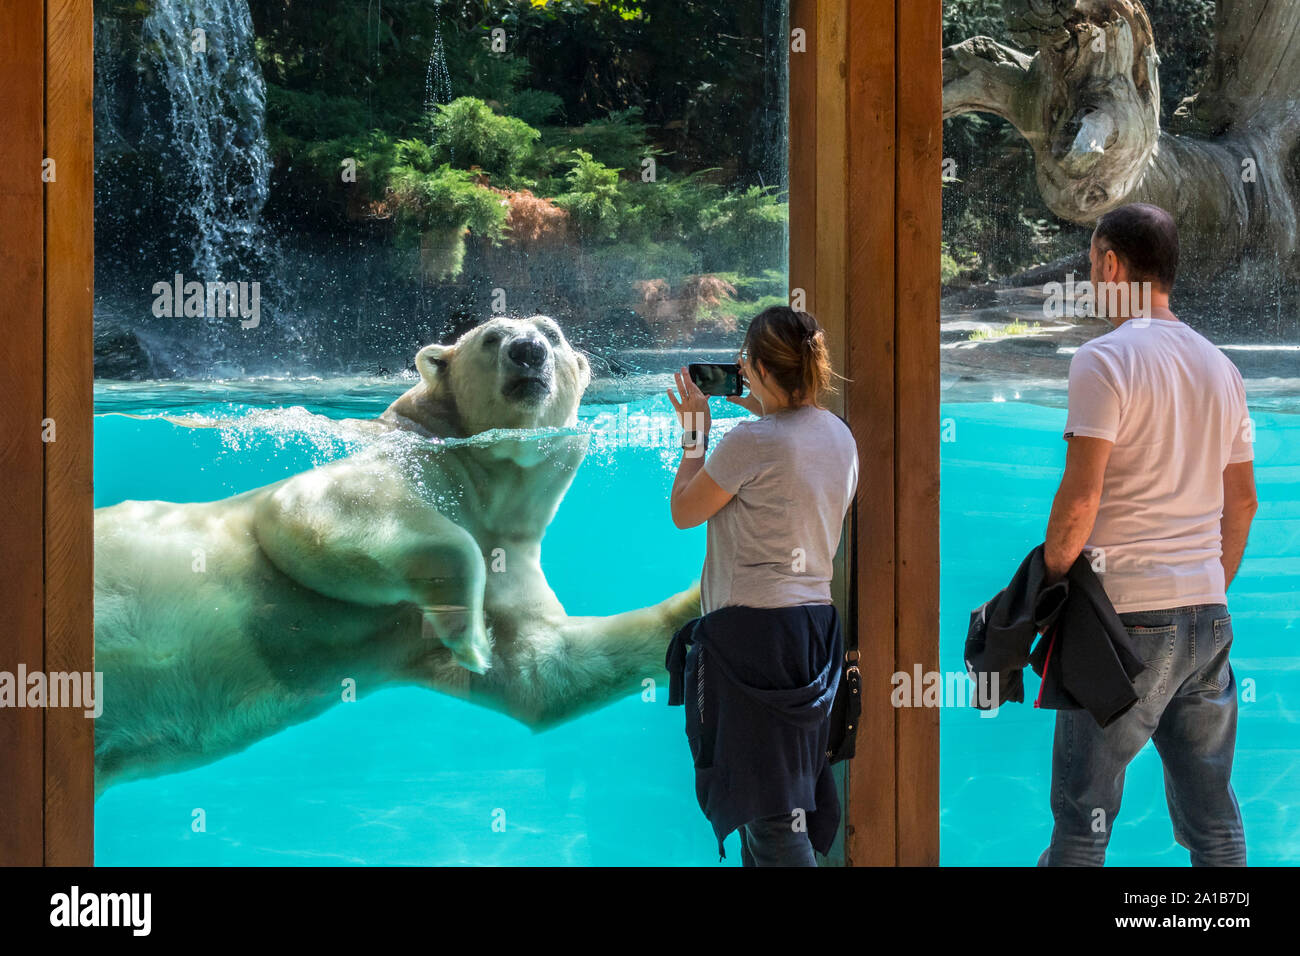 Visitors taking pictures with smartphone while giant polar bear (Ursus maritimus / Thalarctos maritimus) is swimming past, Zoo de la Flèche, France Stock Photo